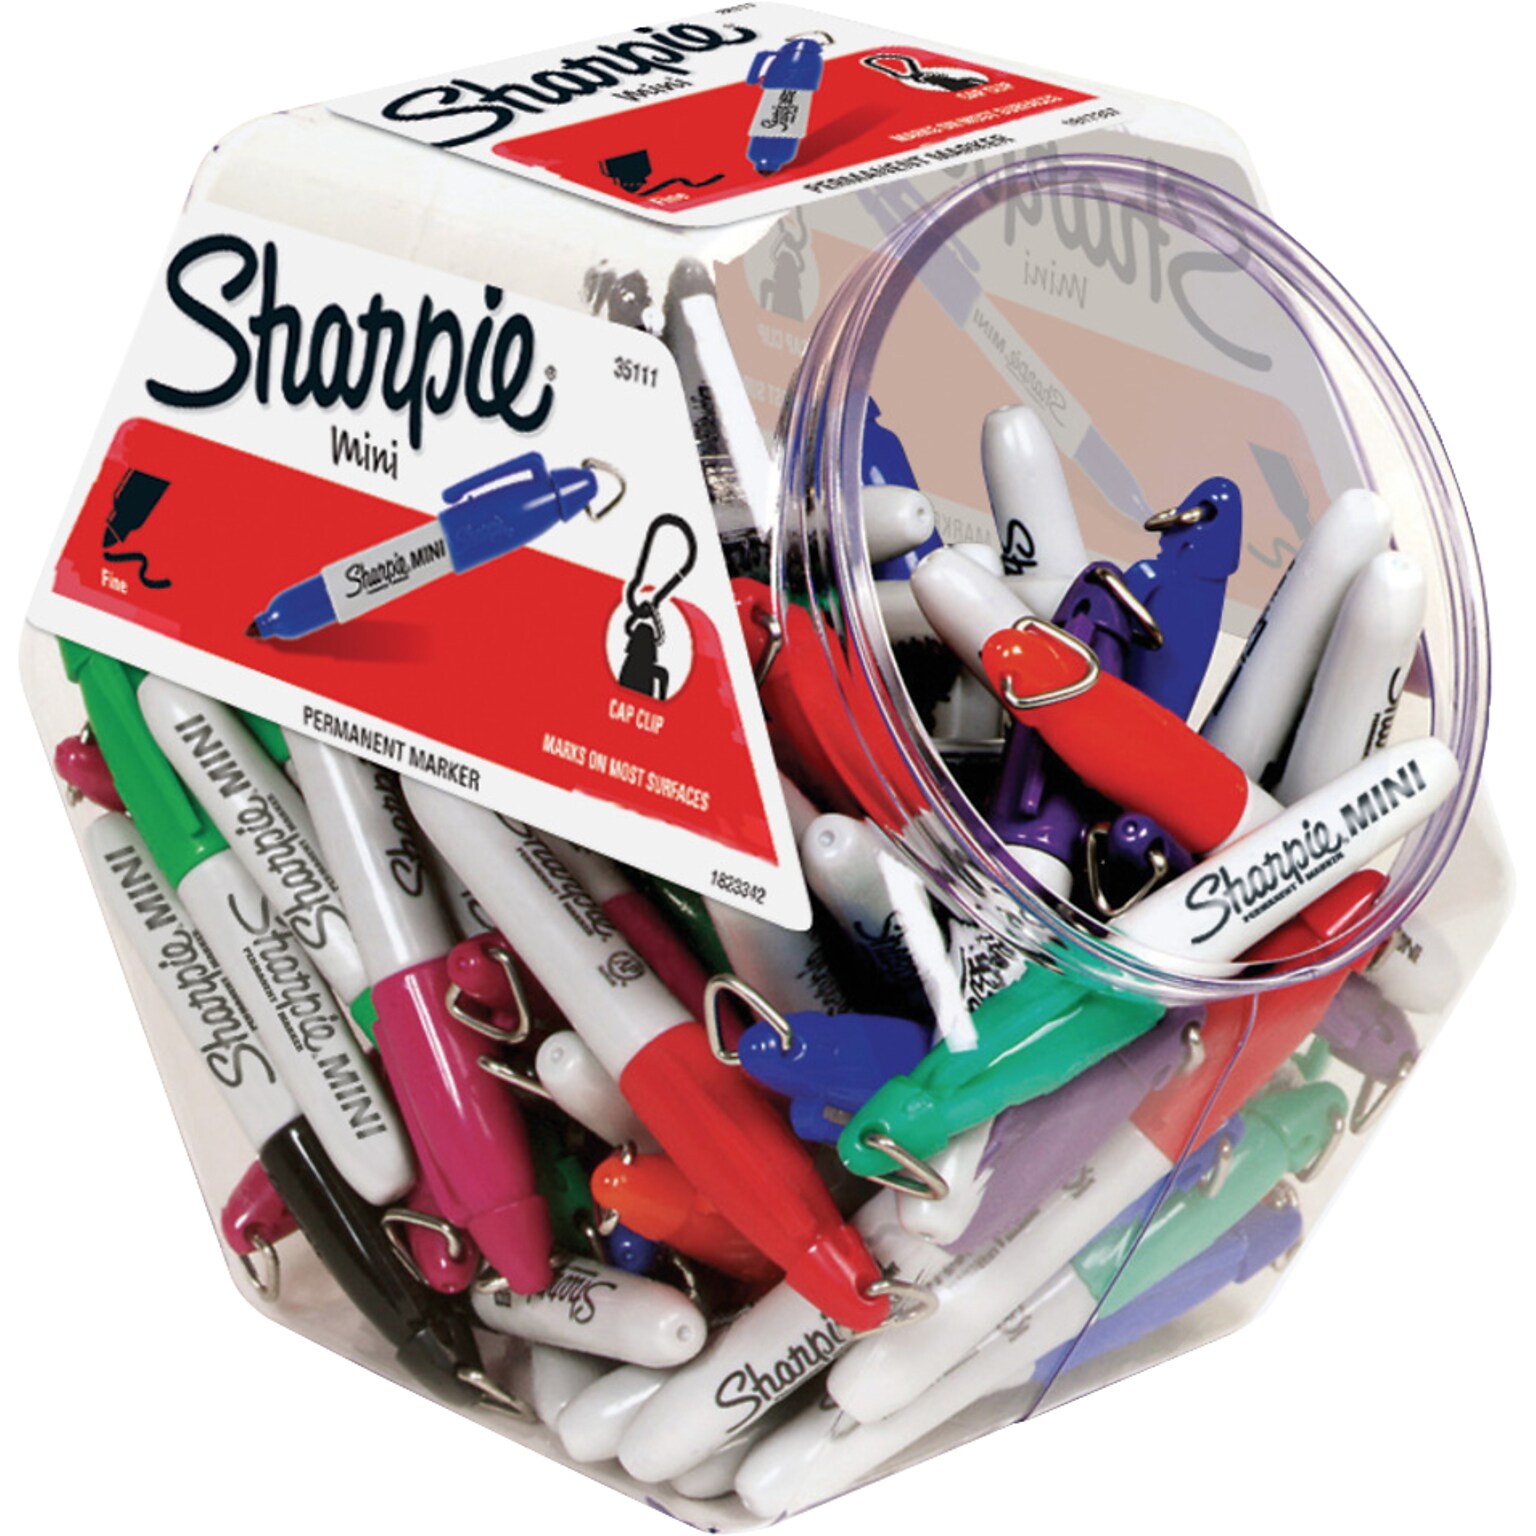 Sharpie Mini Permanent Markers, Fine Tip, Assorted, 72/Pack (35111)